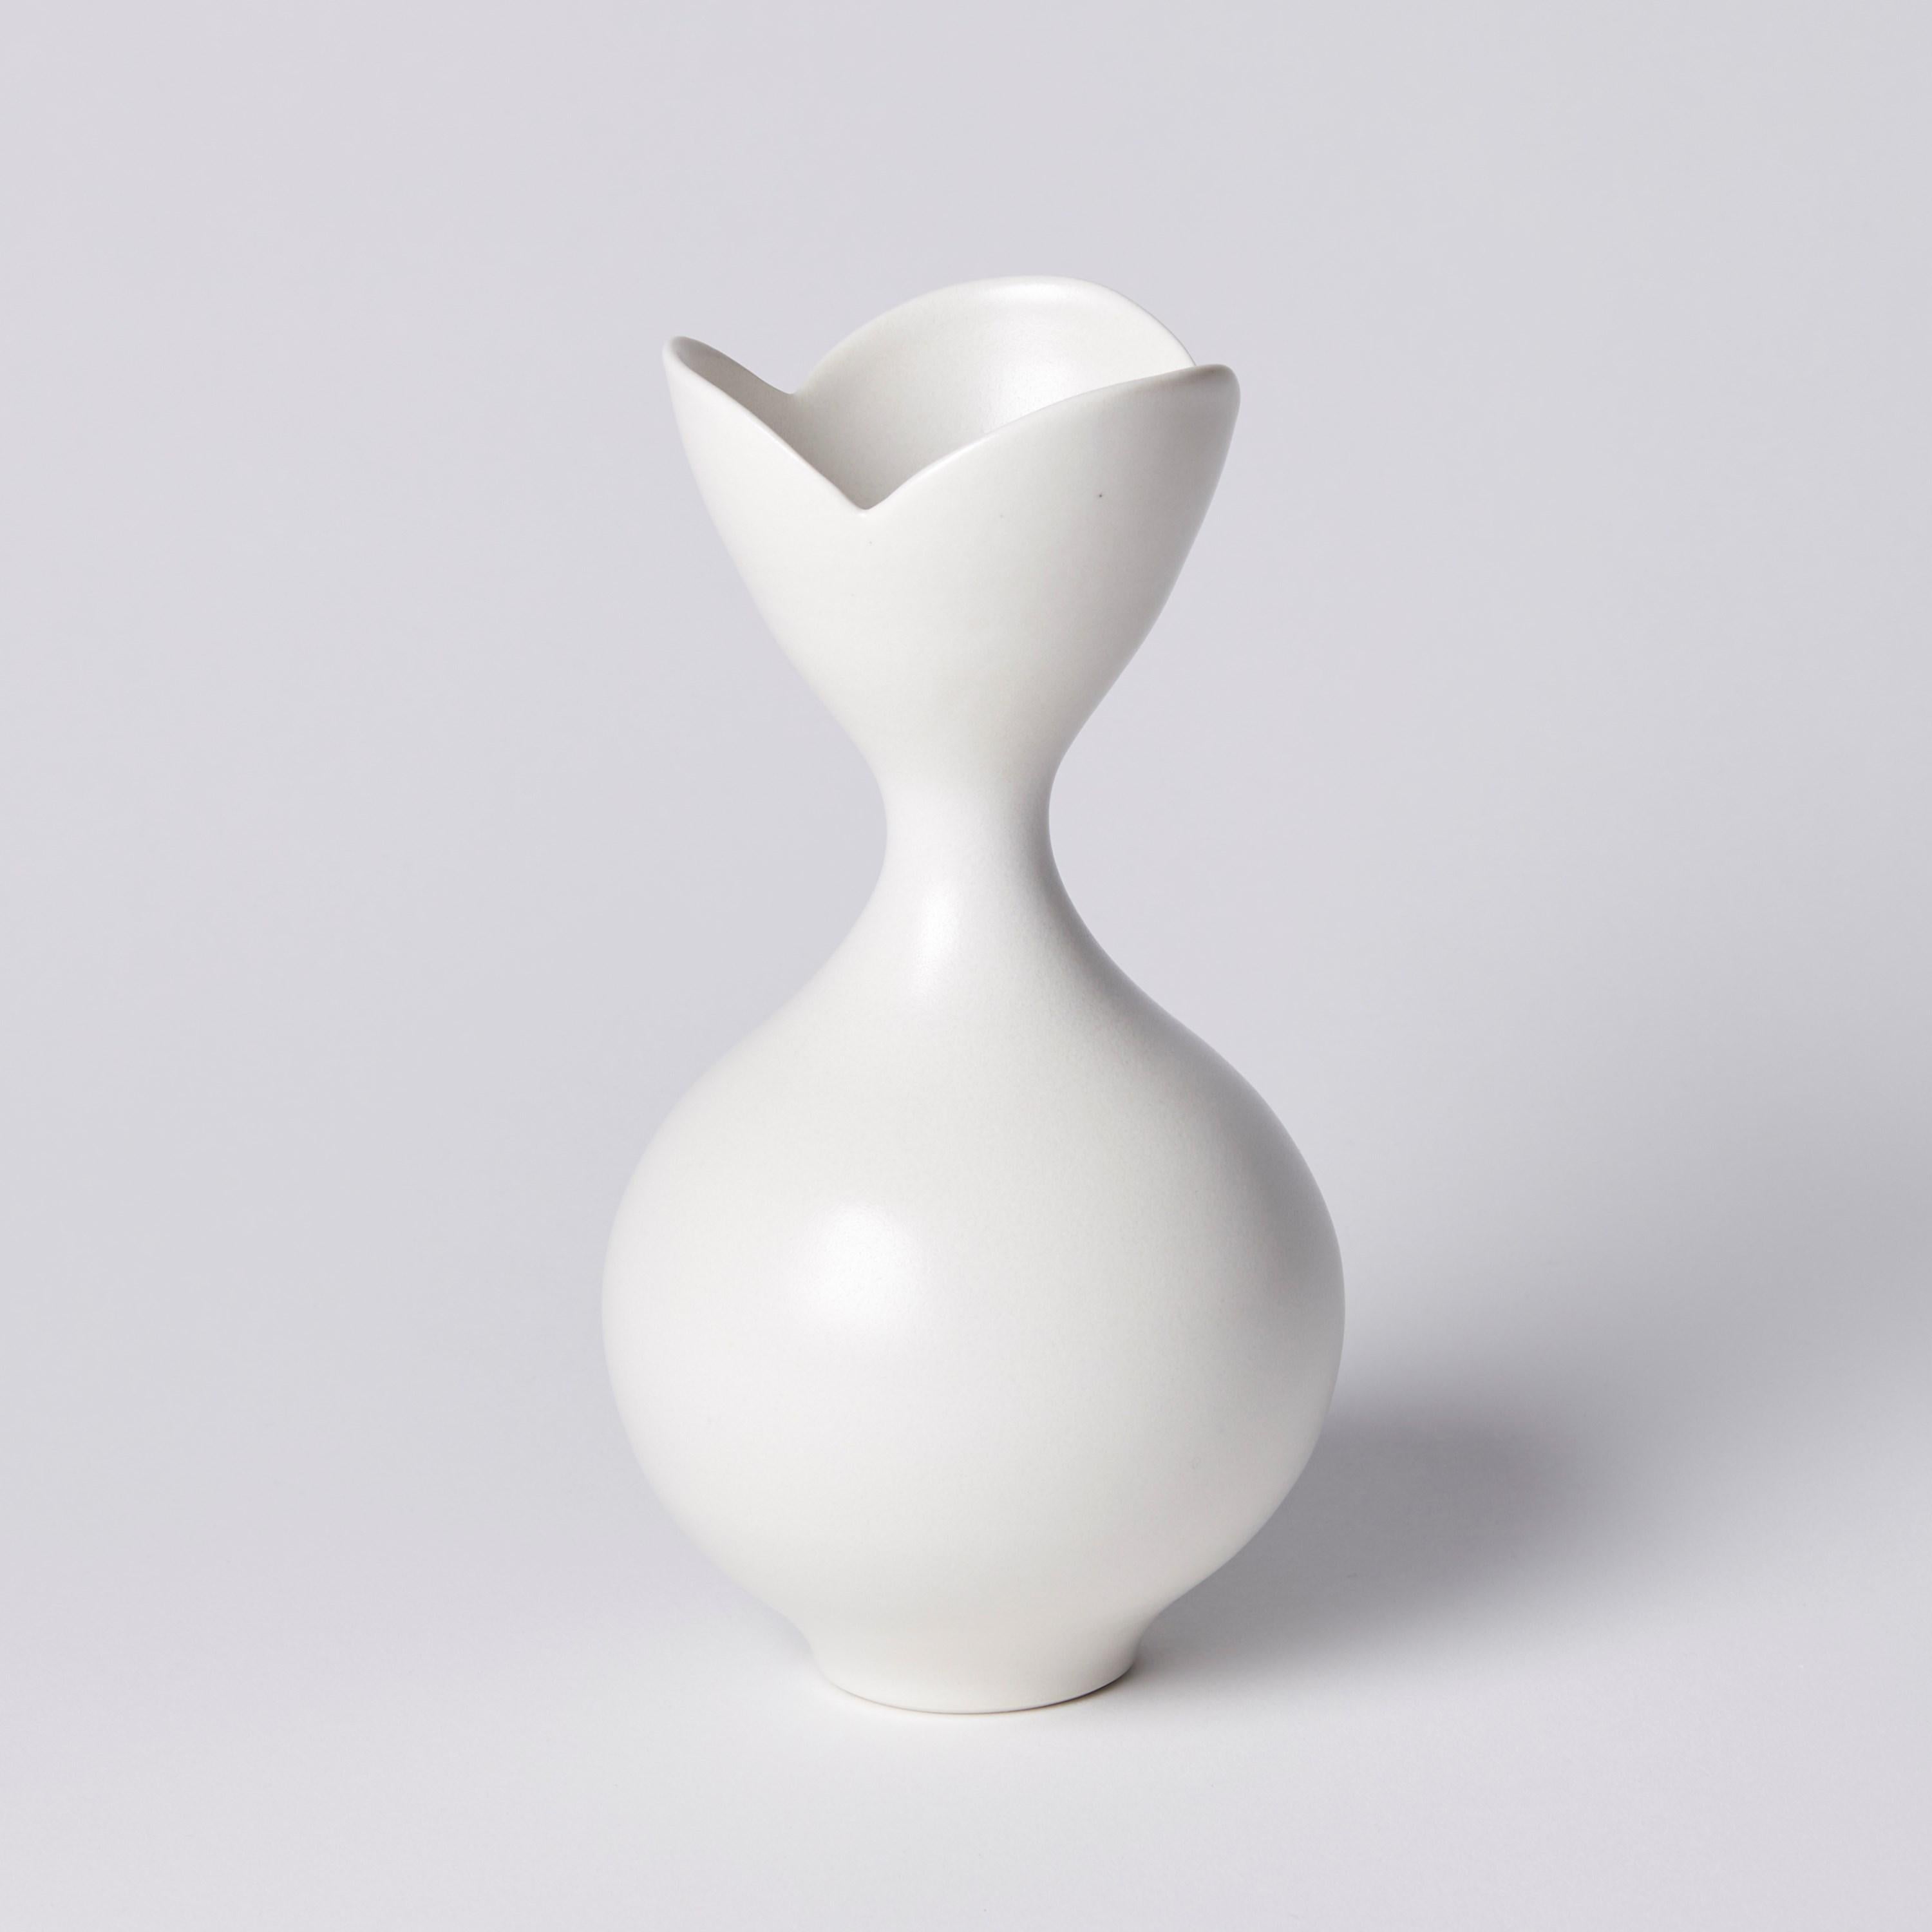 ‘Vase with Tri Lobed Rim I' is a unique porcelain sculptural vessel by the British artist, Vivienne Foley. 

Vivienne Foley is based in Gloucestershire where she produces exquisite ceramic sculpture. Although in essence they are often functional